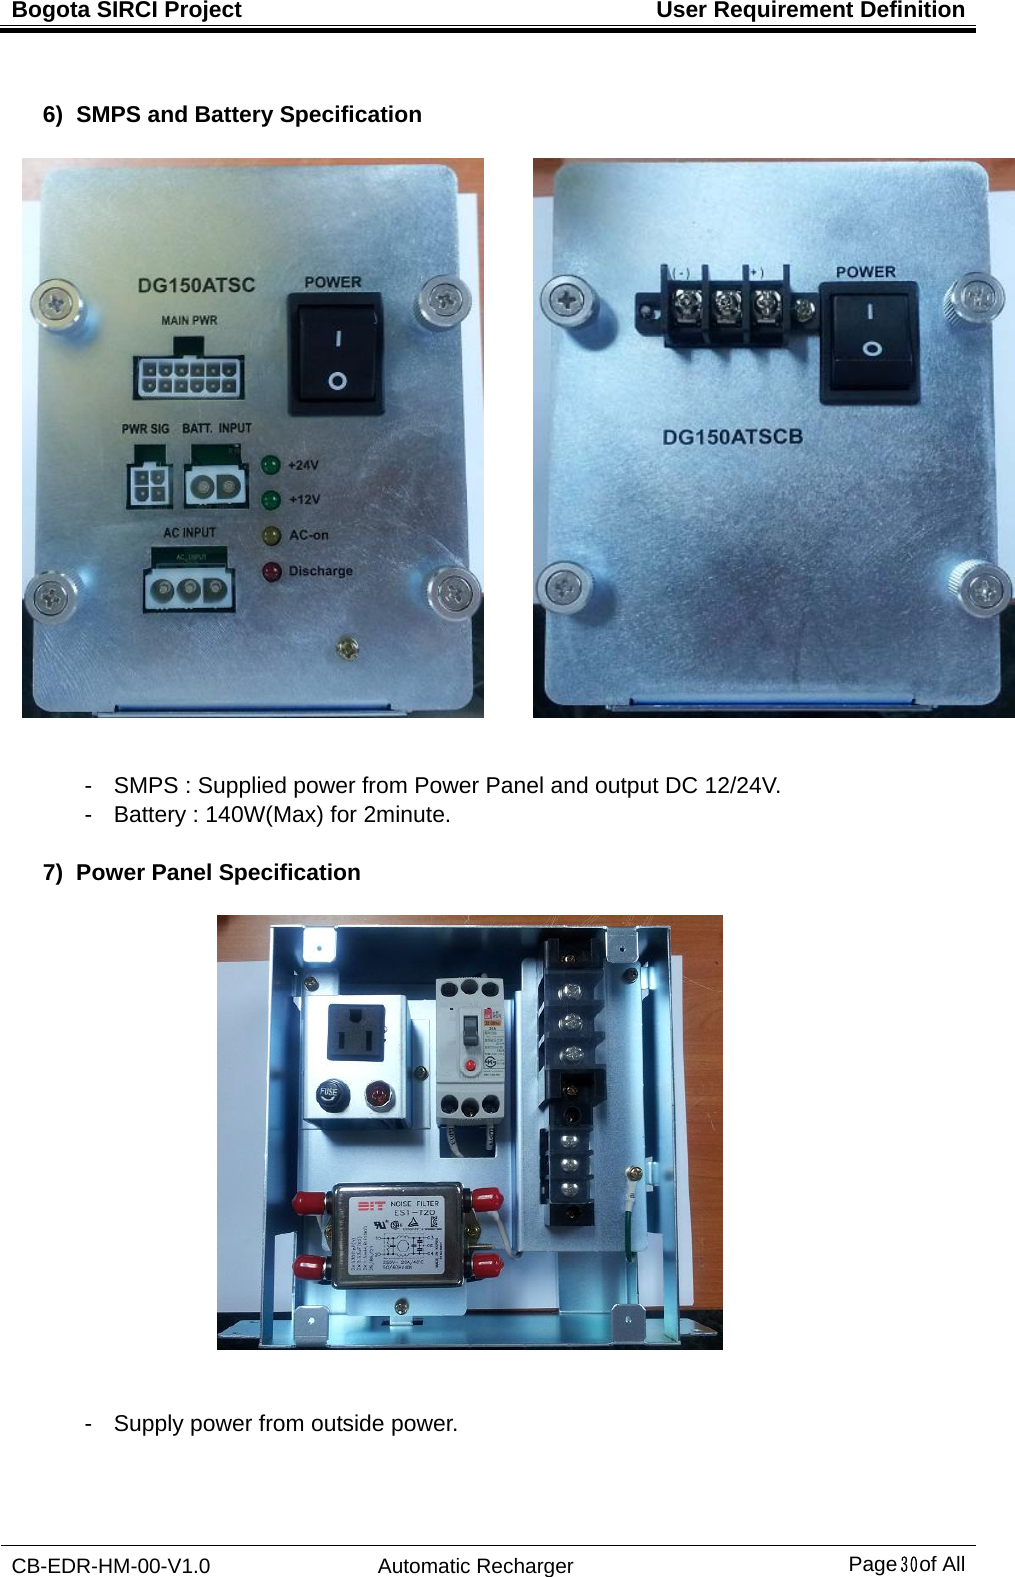 Bogota SIRCI Project  User Requirement Definition CB-EDR-HM-00-V1.0 Automatic Recharger Page３０ of All    6)  SMPS and Battery Specification    -  SMPS : Supplied power from Power Panel and output DC 12/24V.   -  Battery : 140W(Max) for 2minute.  7)  Power Panel Specification     -  Supply power from outside power.   